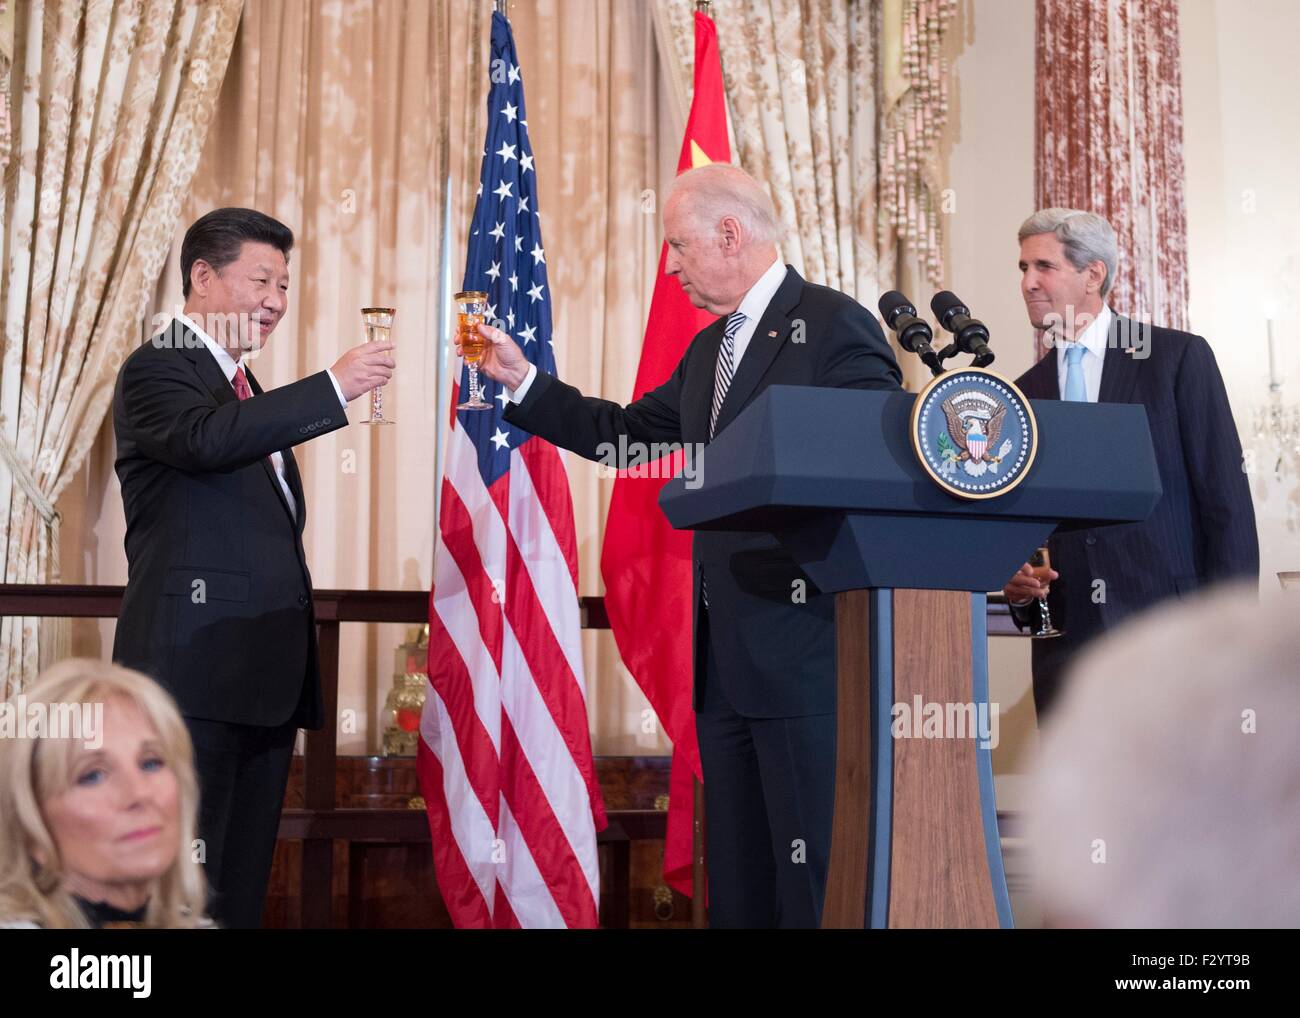 Washington DC, USA. 25th Sep, 2015.  U.S. Vice President Joe Biden raises his glass to toast Chinese President Xi Jinping at a State Luncheon in the Chinese President's honor as Secretary of State John Kerry look on at the Department of State September 25, 2015 in Washington, DC. Stock Photo